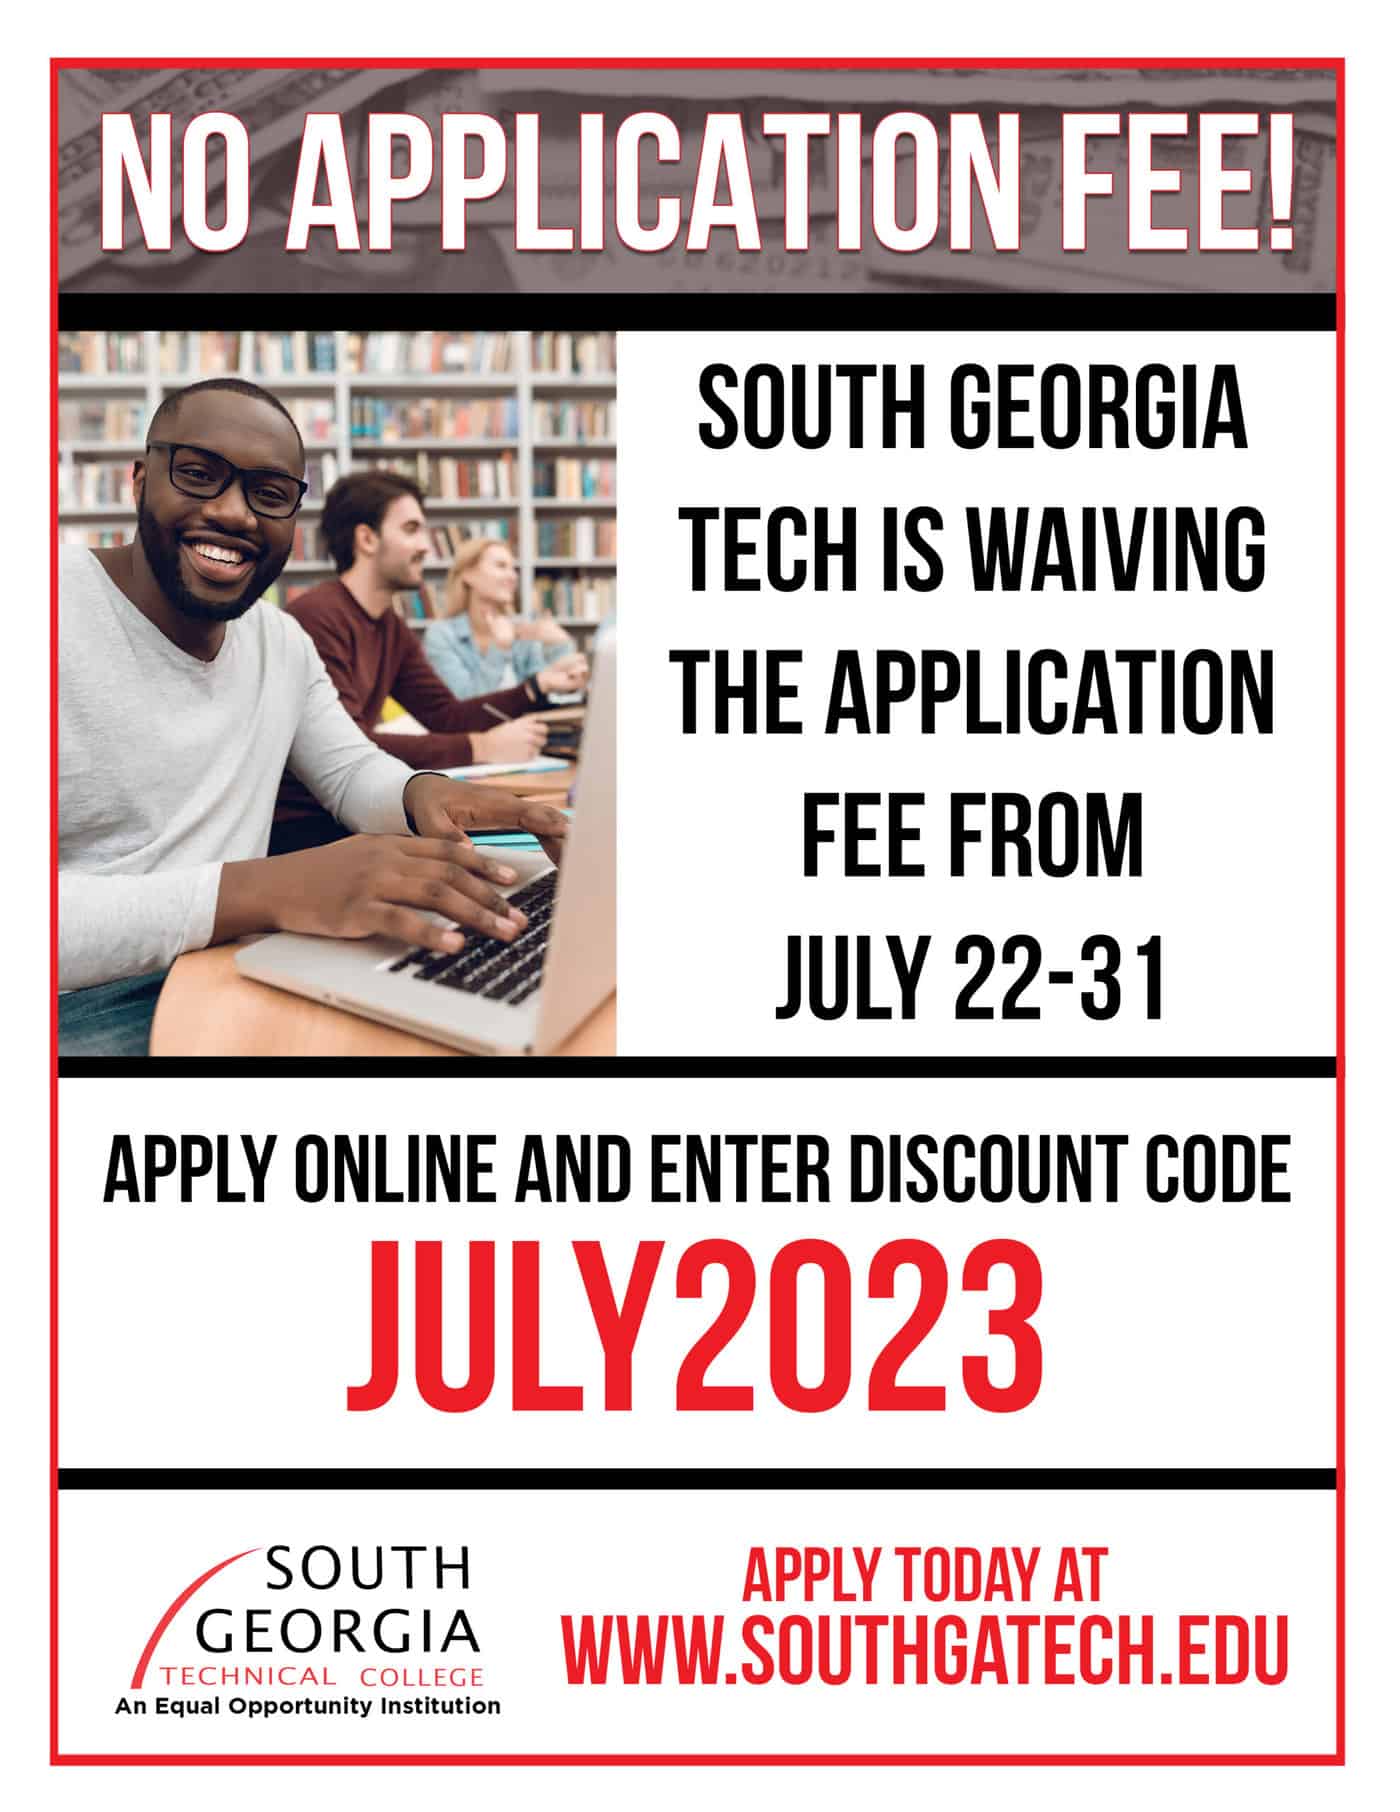 South Georgia Tech waiving apply fee from July 22 – 31, 2023.